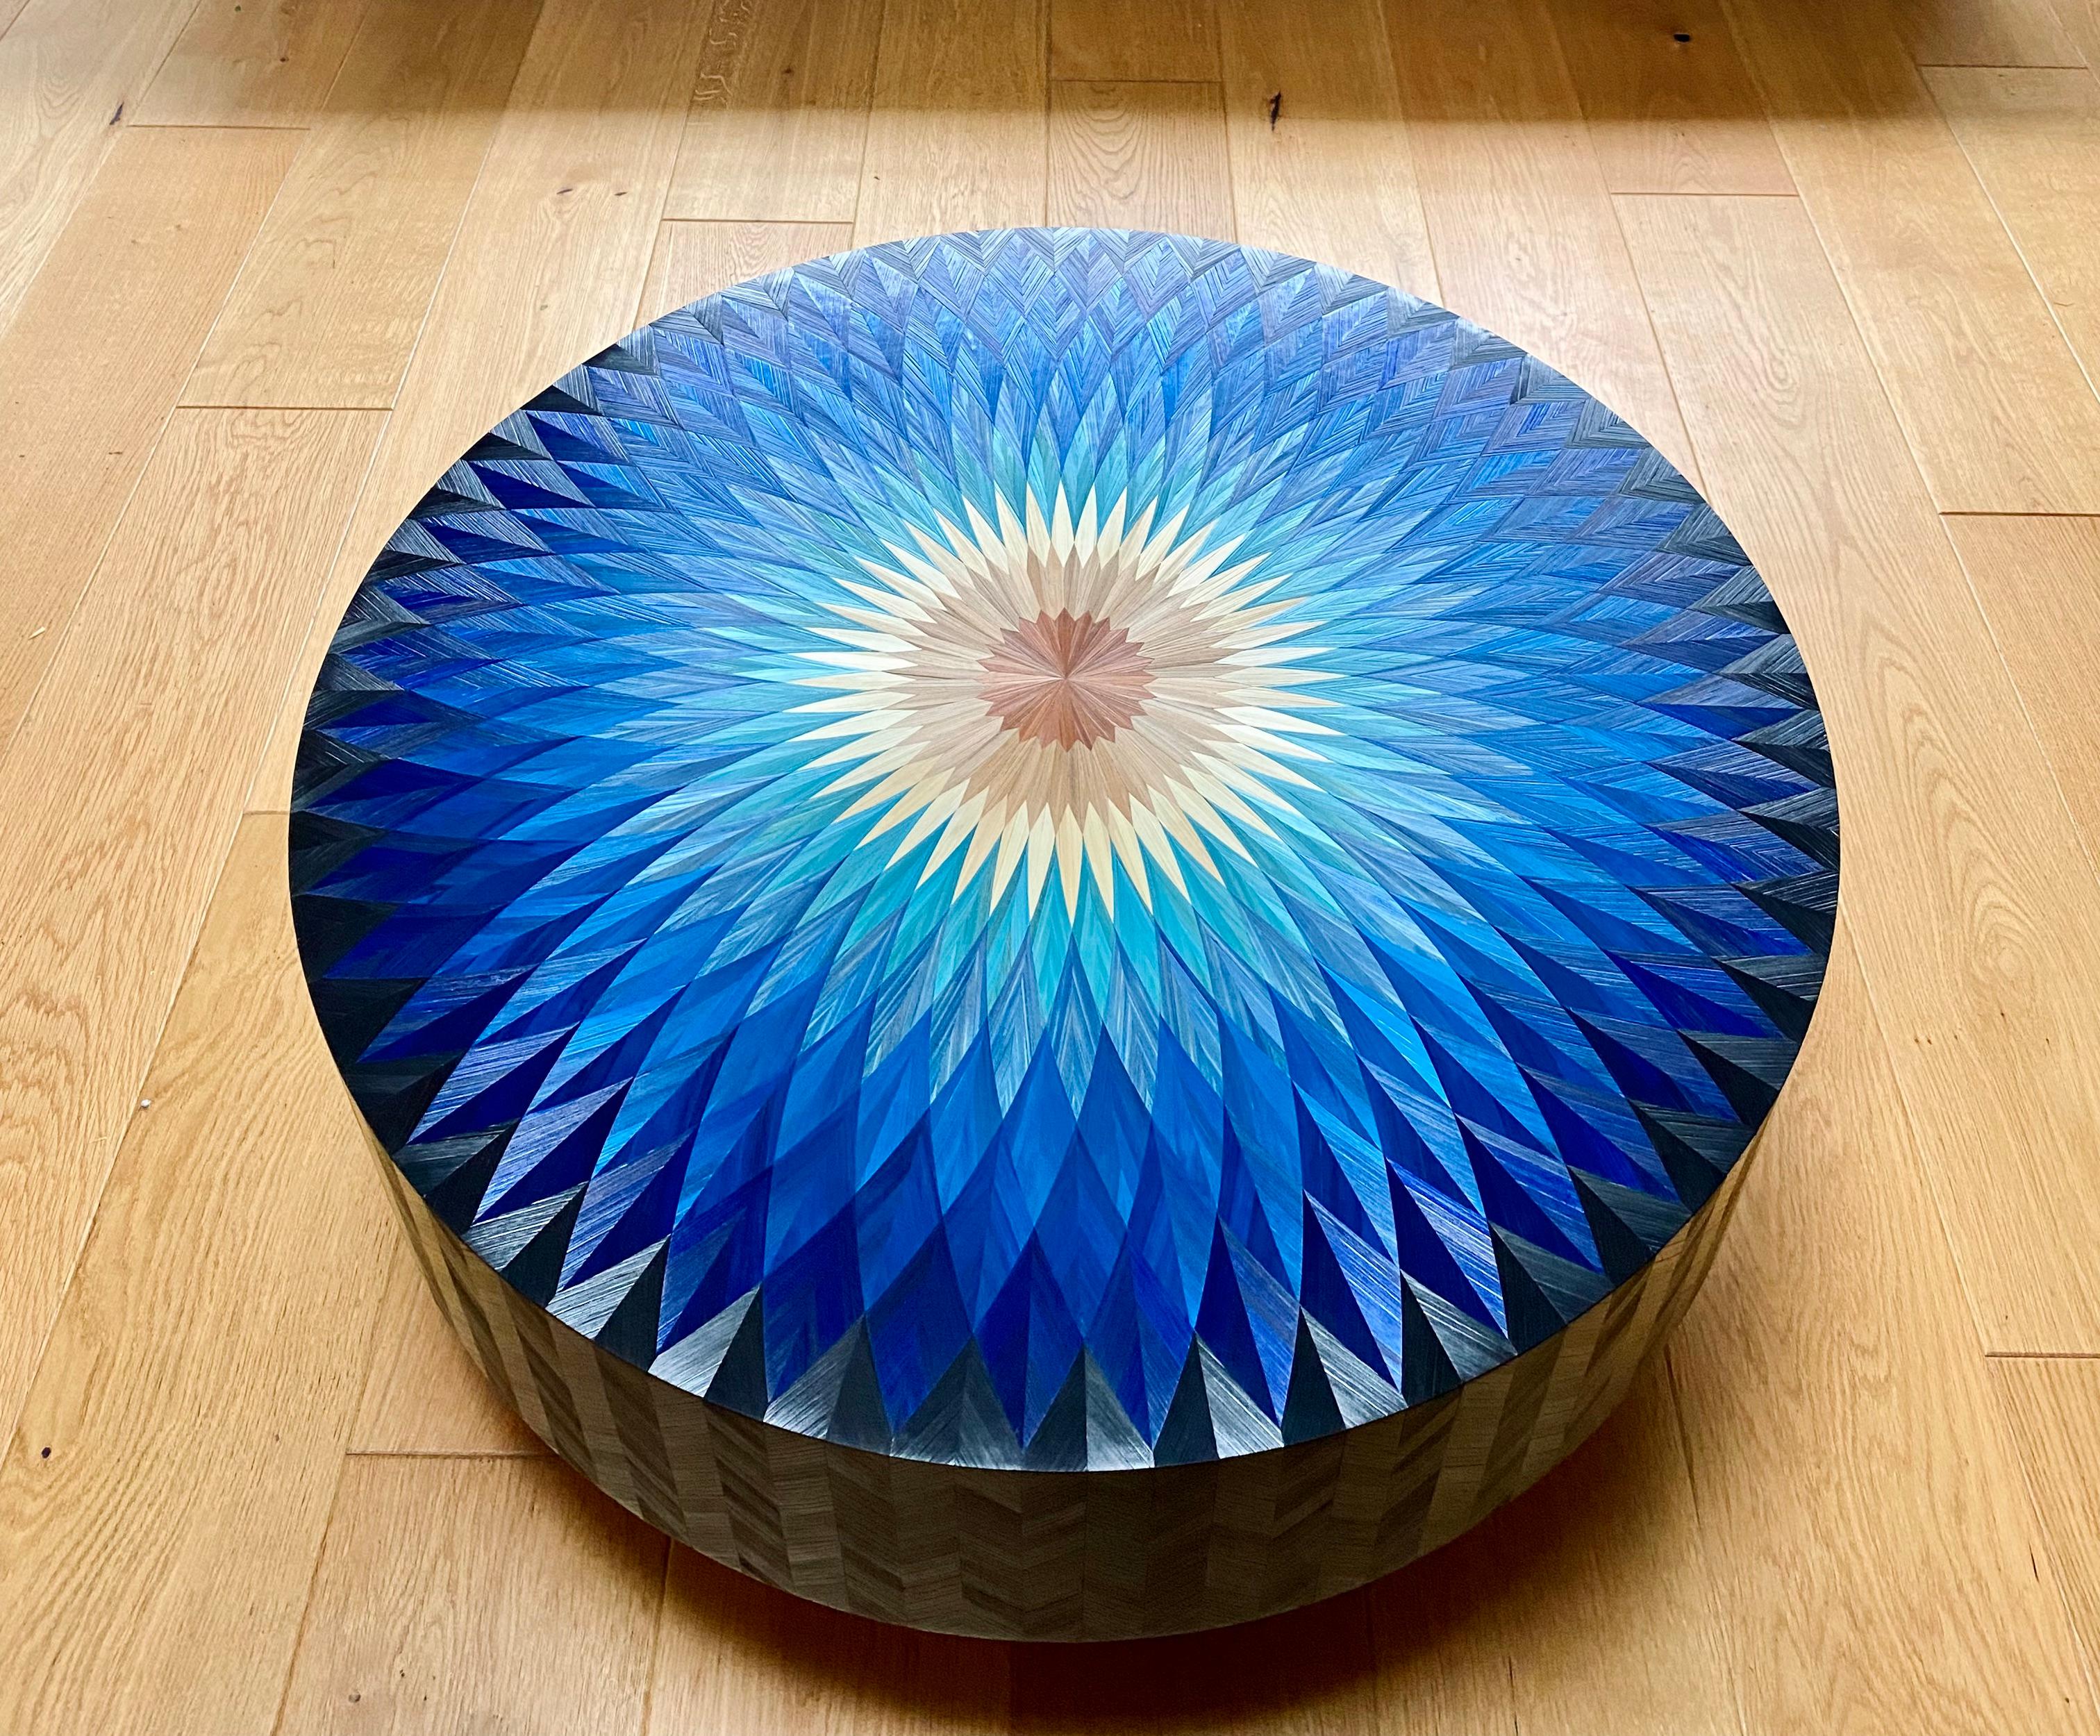 This coffee table represents a rosette in shades of blue. The solar and luminous center fades towards blue then black. The reflections are endless on this plateau and the edges are entirely inlaid with rye straw.

I wanted to put this rosette as if